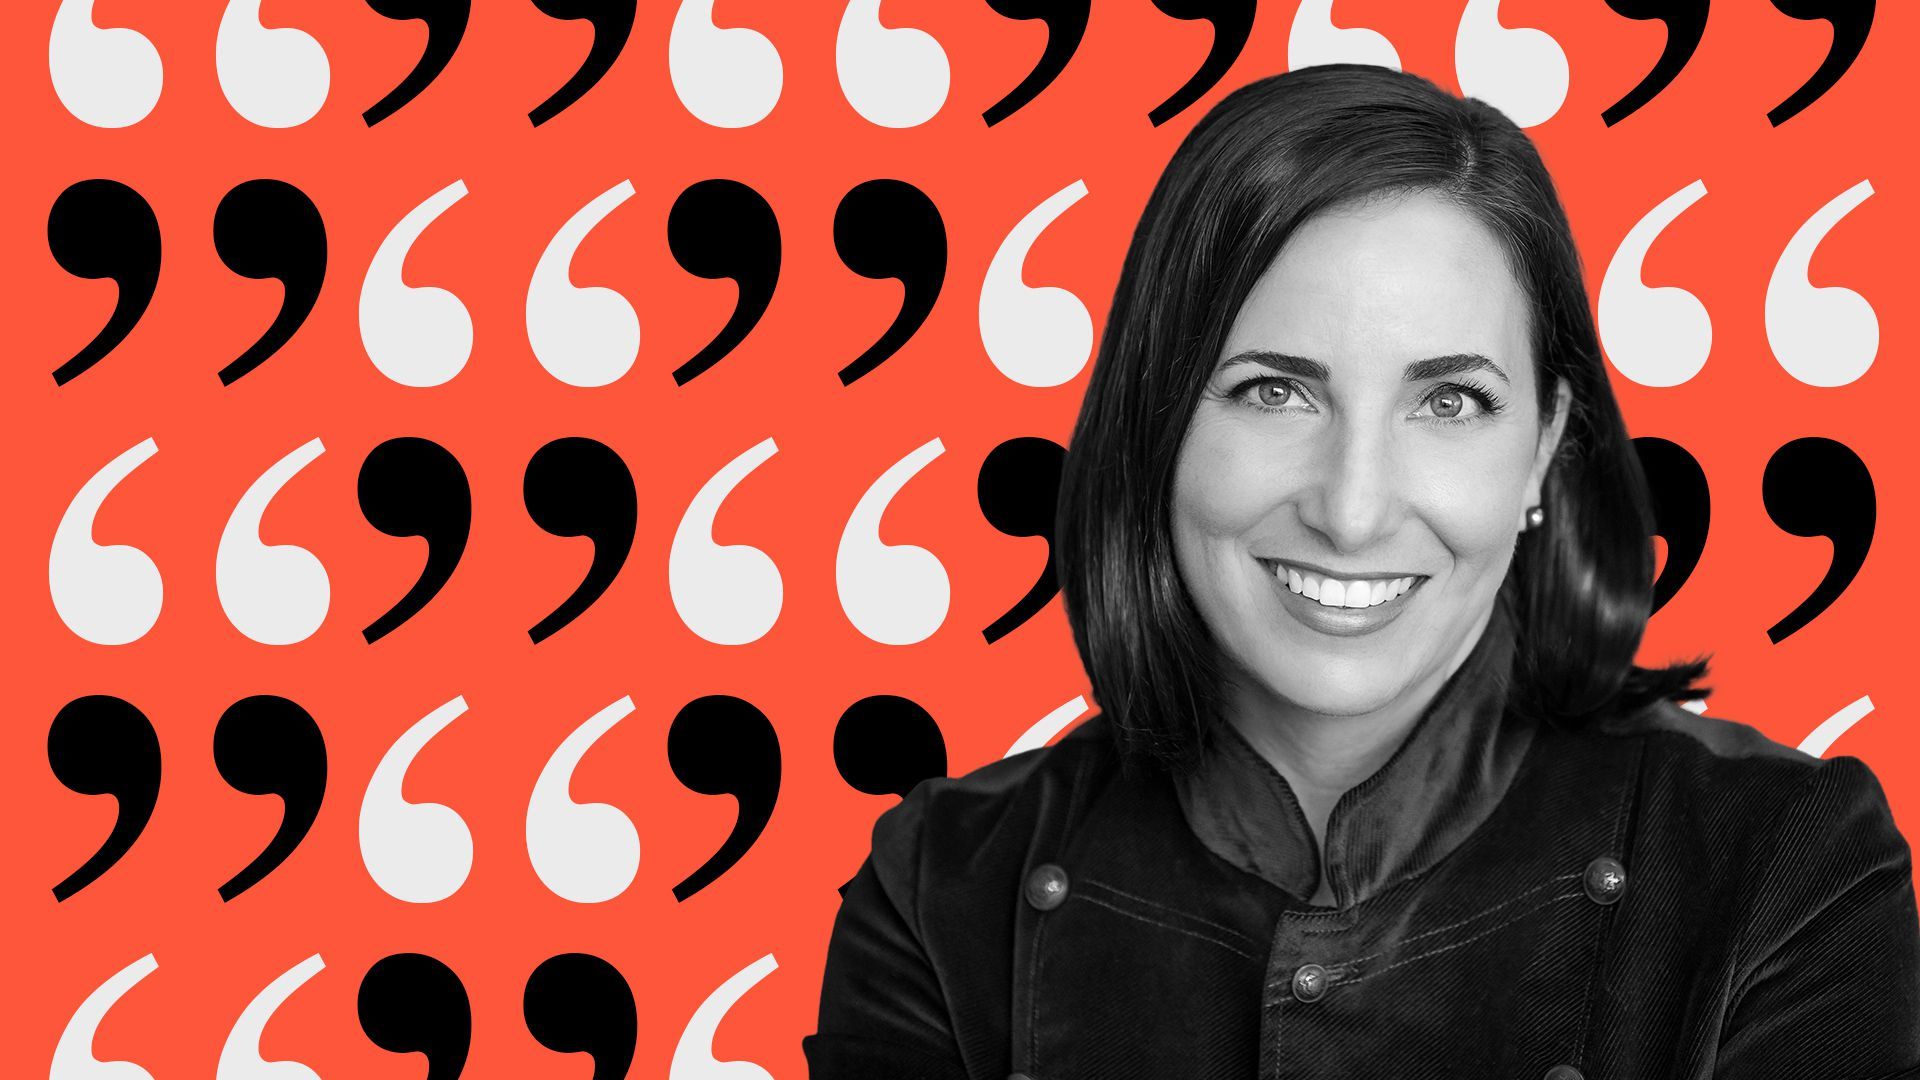 Photo illustration of Elisa Schreiber on a patterned background of abstract quotation marks.